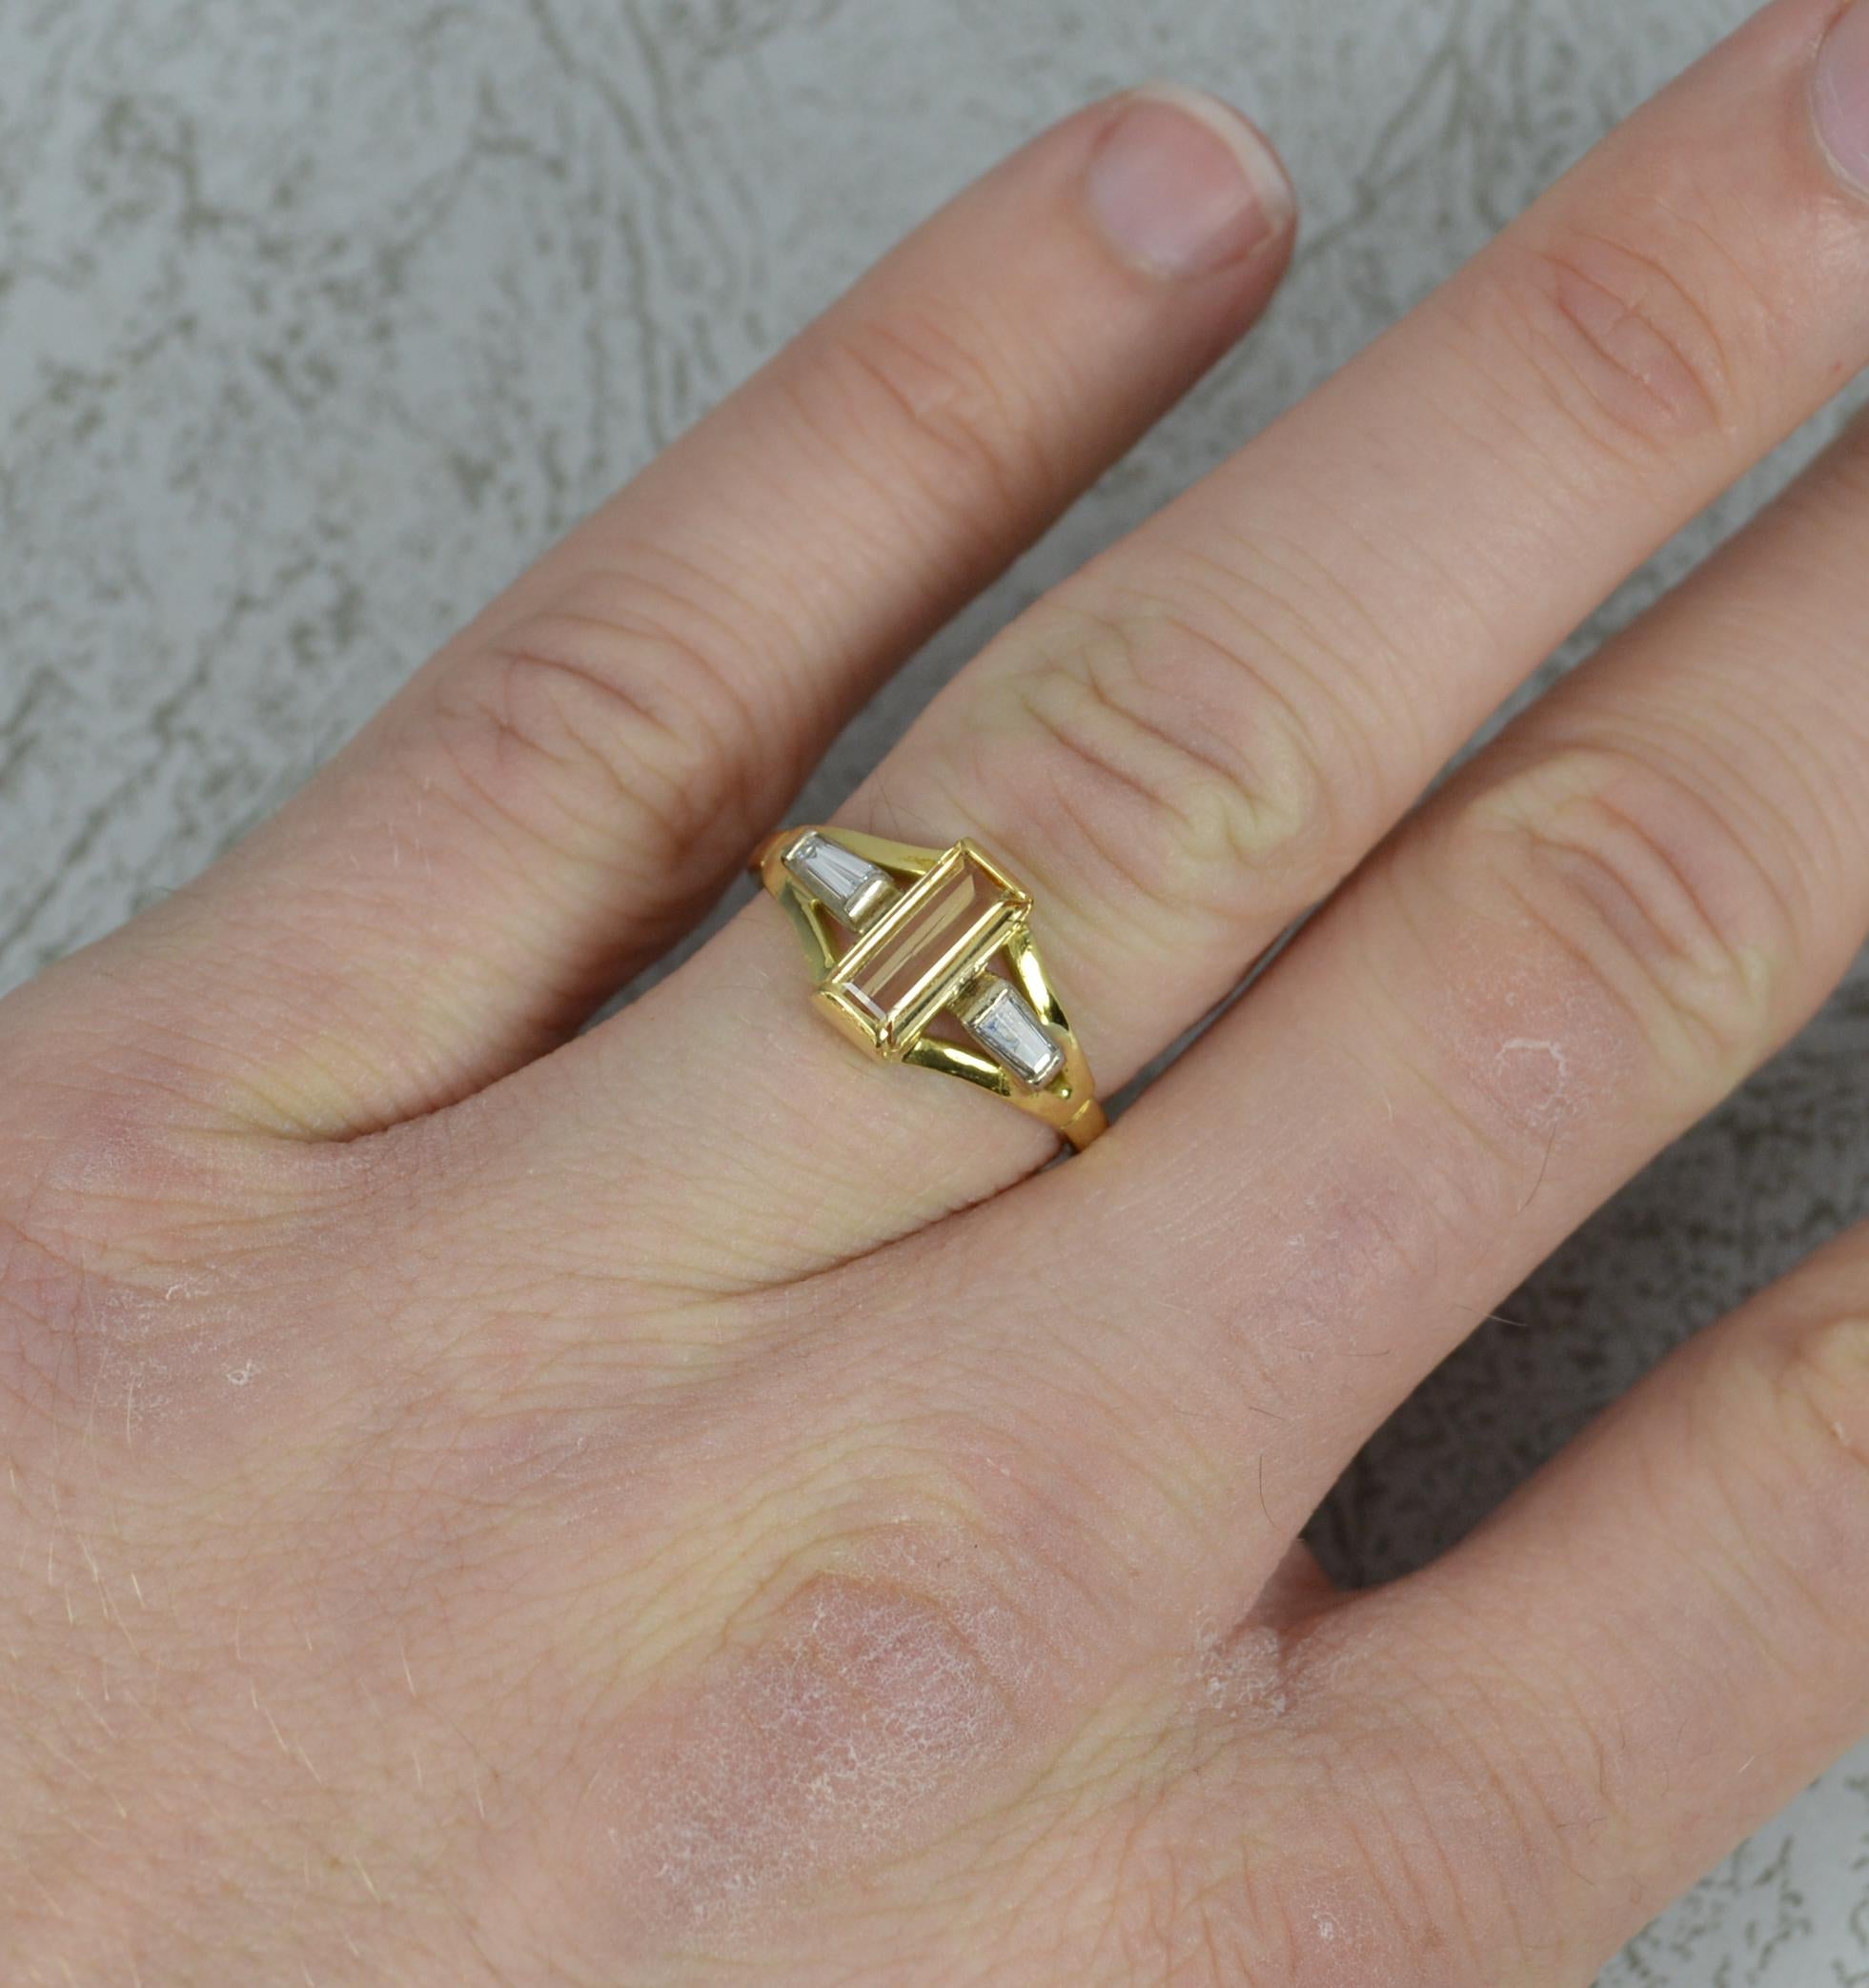 A stunning Topaz and Diamond ring in 18ct Gold.
​4mm x 8.5mm emerald cut gold topaz to centre in tension setting. Each side set with a tapered baguette cut diamond.
Simple yet stylish example. Well made.

CONDITION ; Excellent. Clean and solid